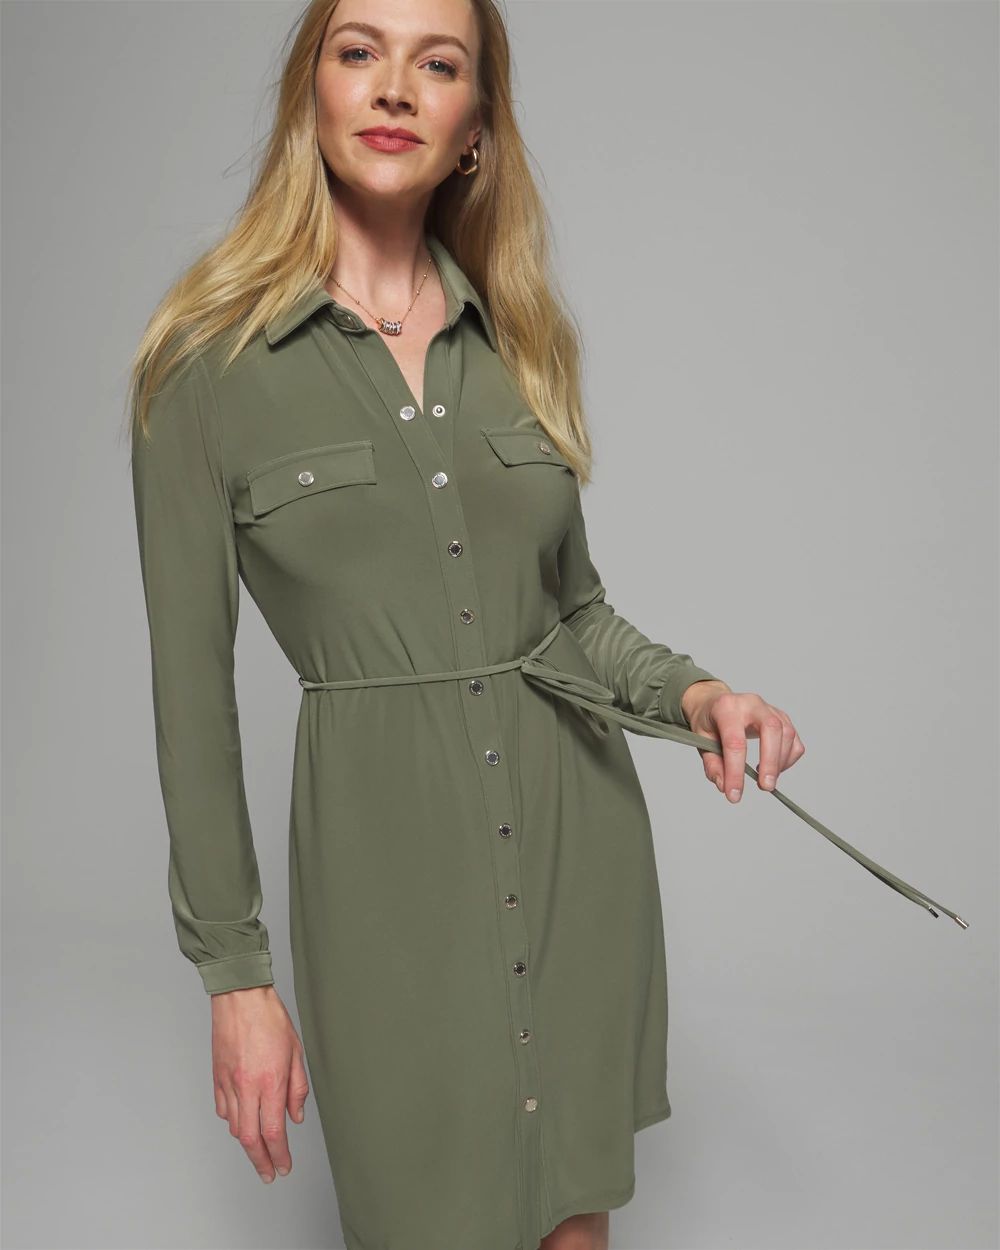 Outlet WHBM Snap Front Shirtdress click to view larger image.